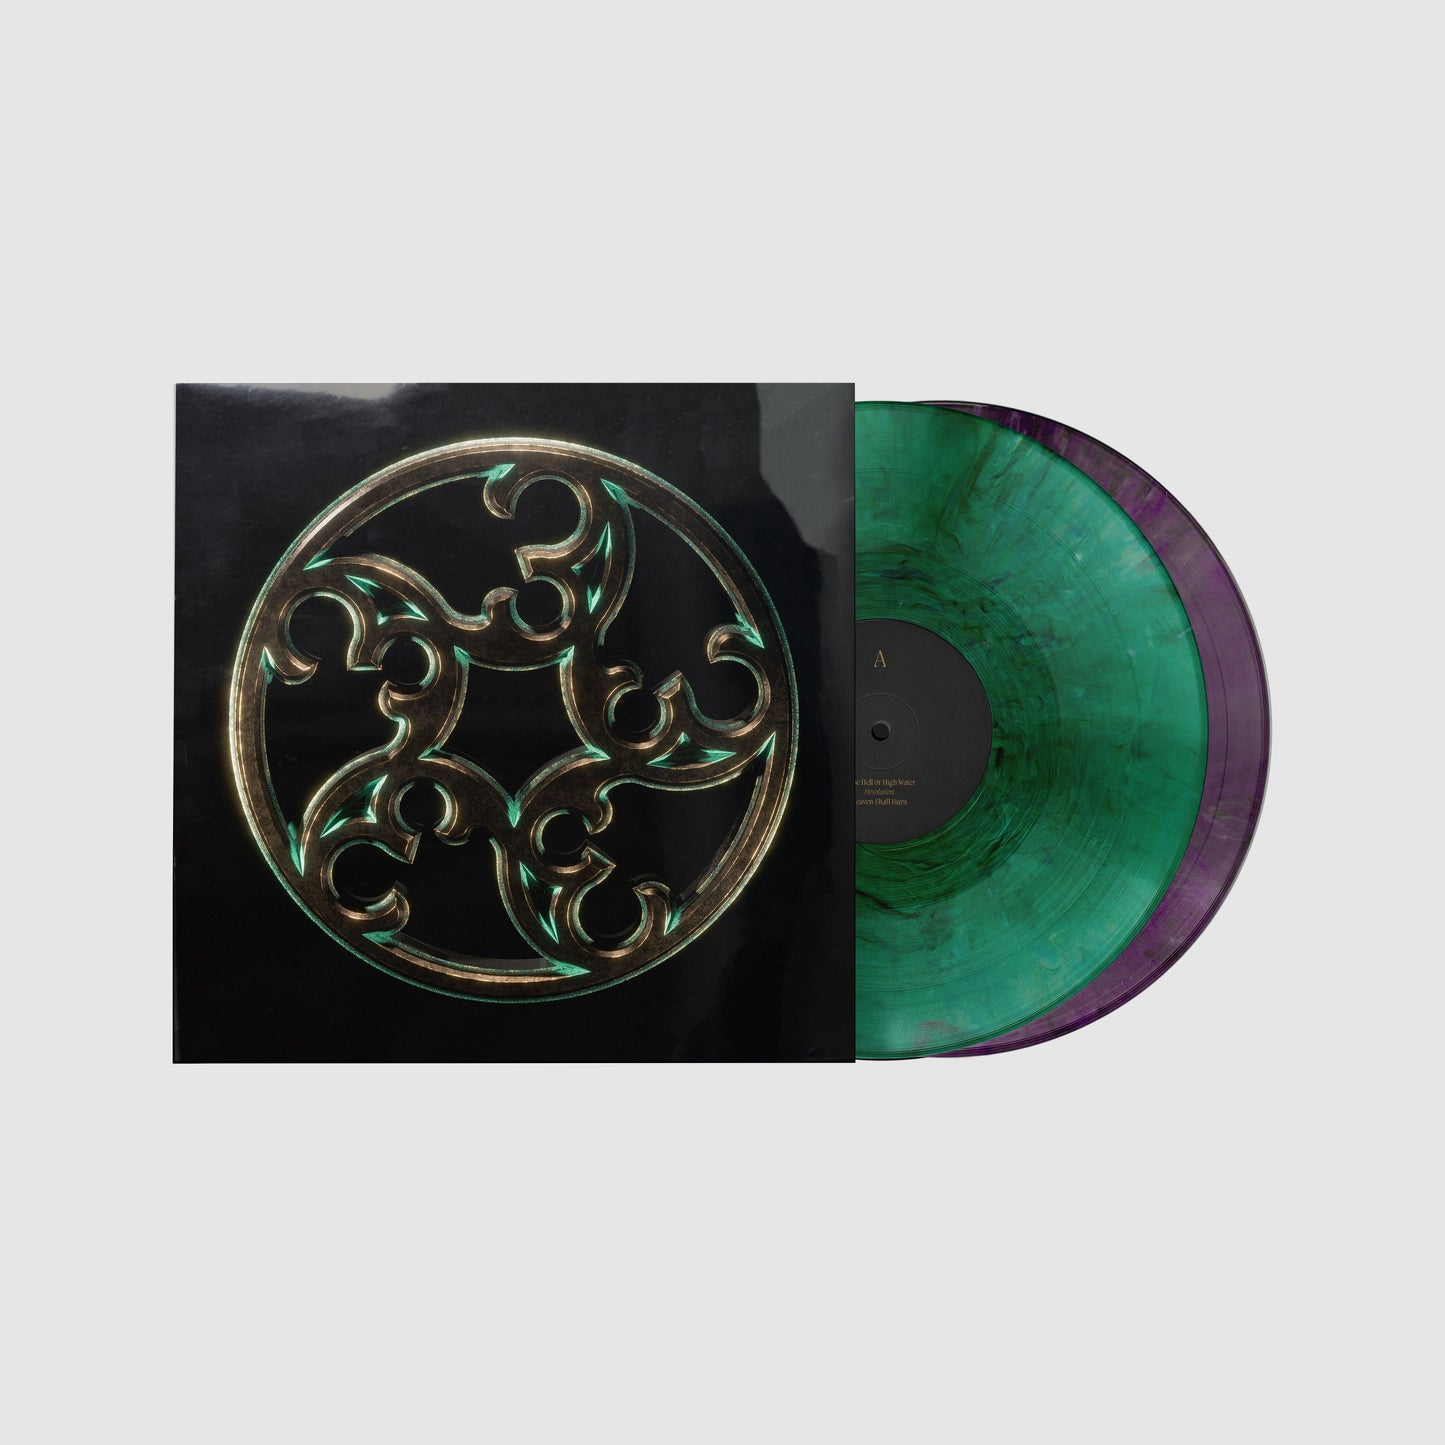 The Black - Limited Colored ReVinyl